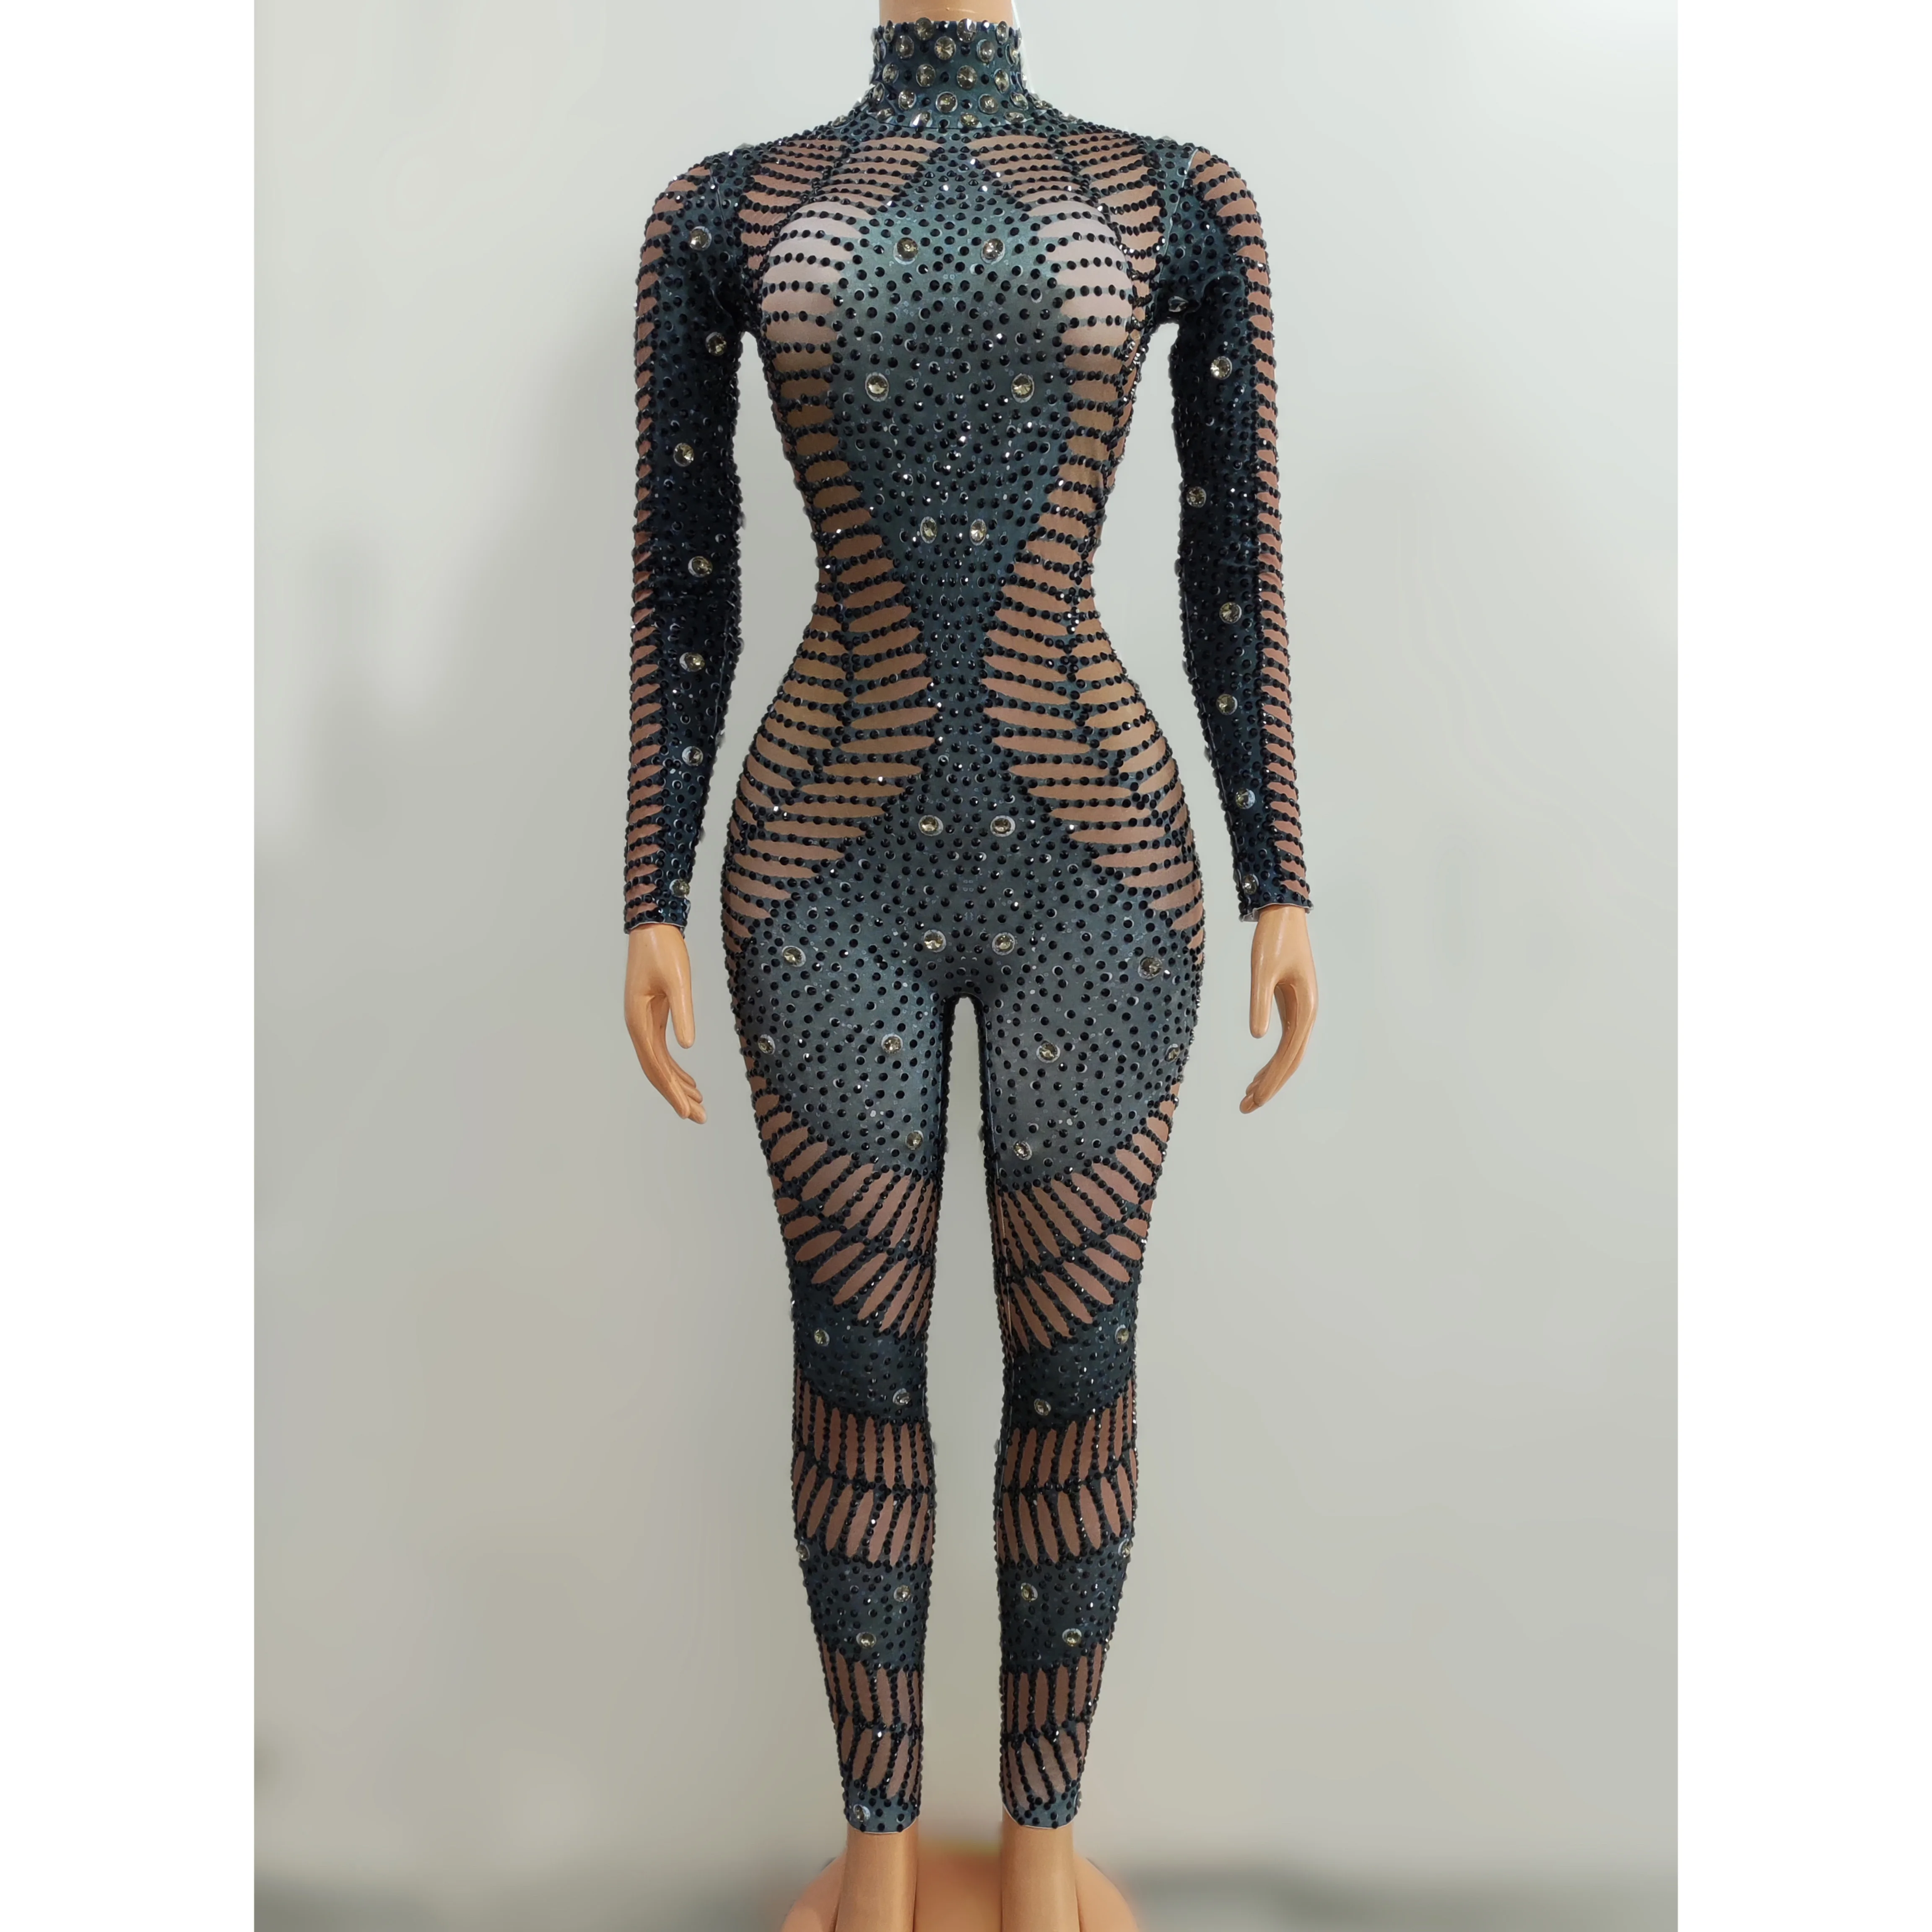 

Bling Crystals Rhinestones Spandex Stretch Jumpsuit Women Evening Party Outfit Nightclub Bar Singer Bodysuit Sexy Dance Costume